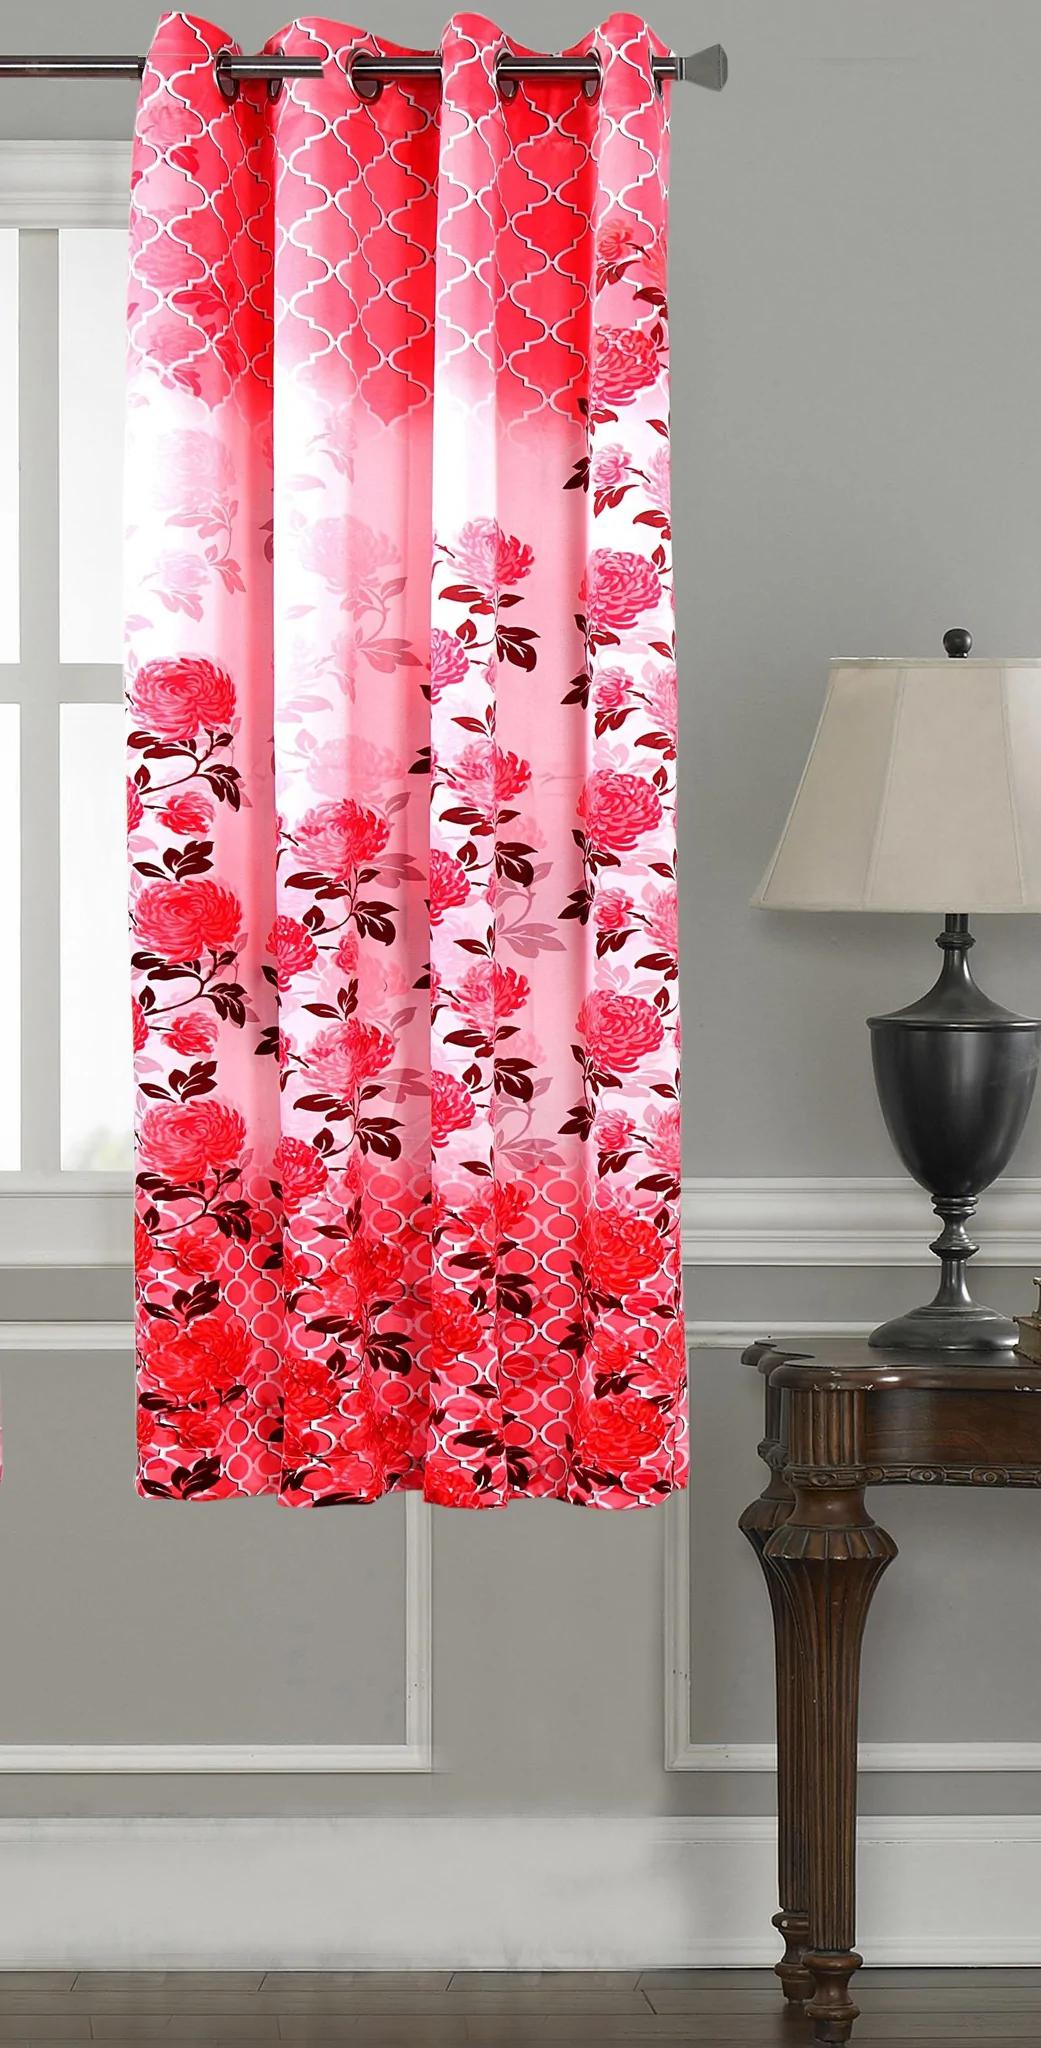 Lushomes Blackout Curtains, Pink Blossom Printed Window Curtain, 8 Metal Eyelets, curtains & drapes, parda, urban space curtains, blackout curtains 5 Feet, screen For Window (54 x 60 inches, Set of 1)